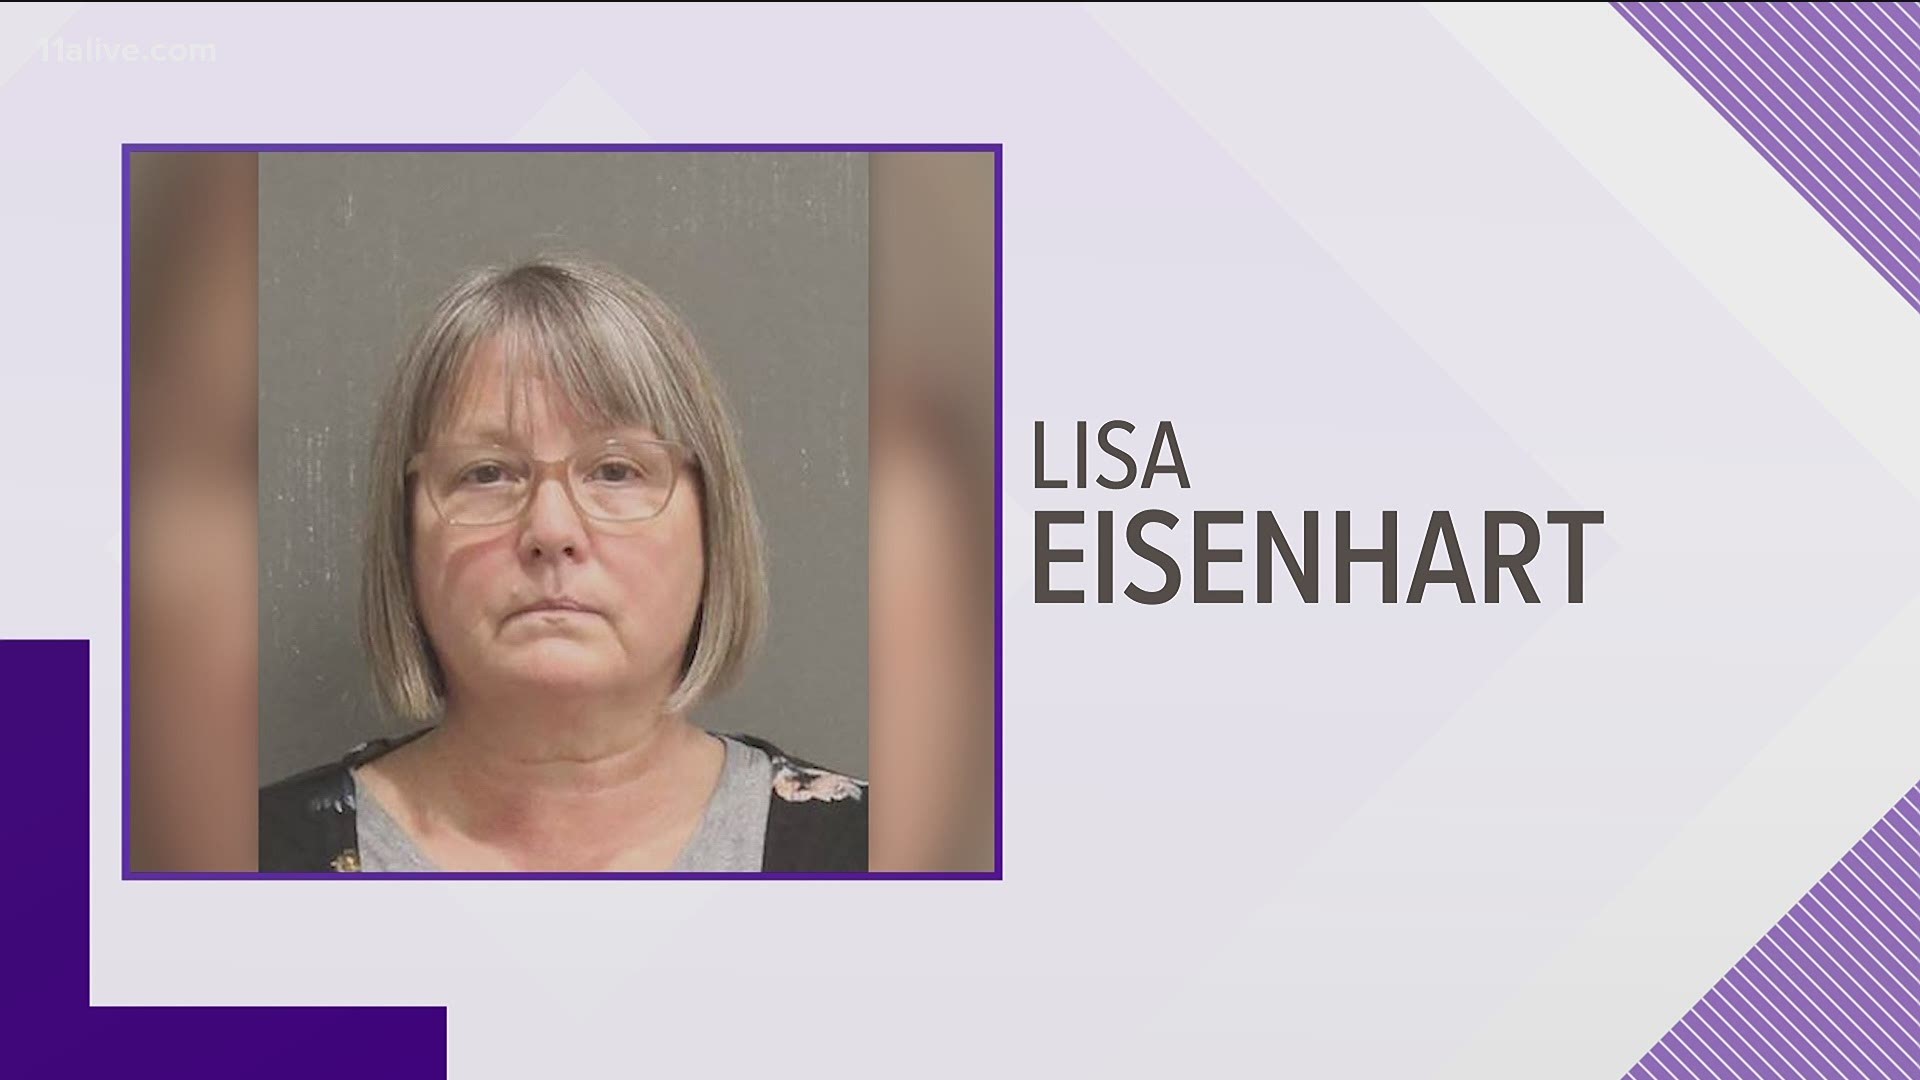 The Justice Department said Lisa Eisenhart, one of the alleged Capitol rioters, must stay in custody.